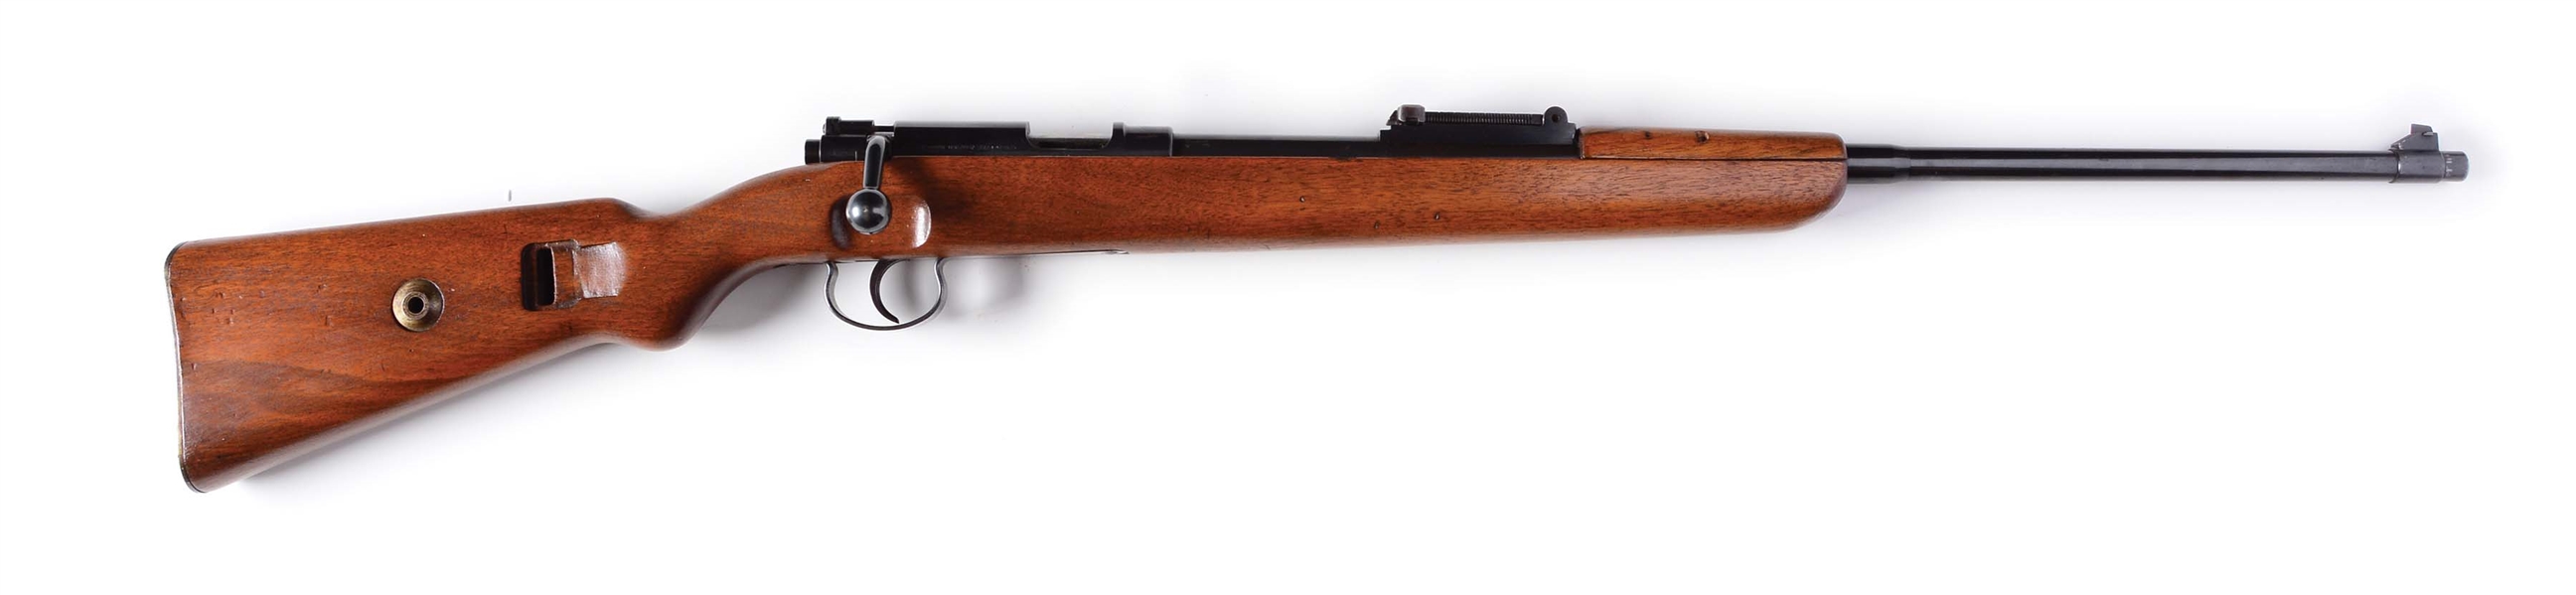 (C) WALTHER KKW .22 BOLT ACTION RIFLE.